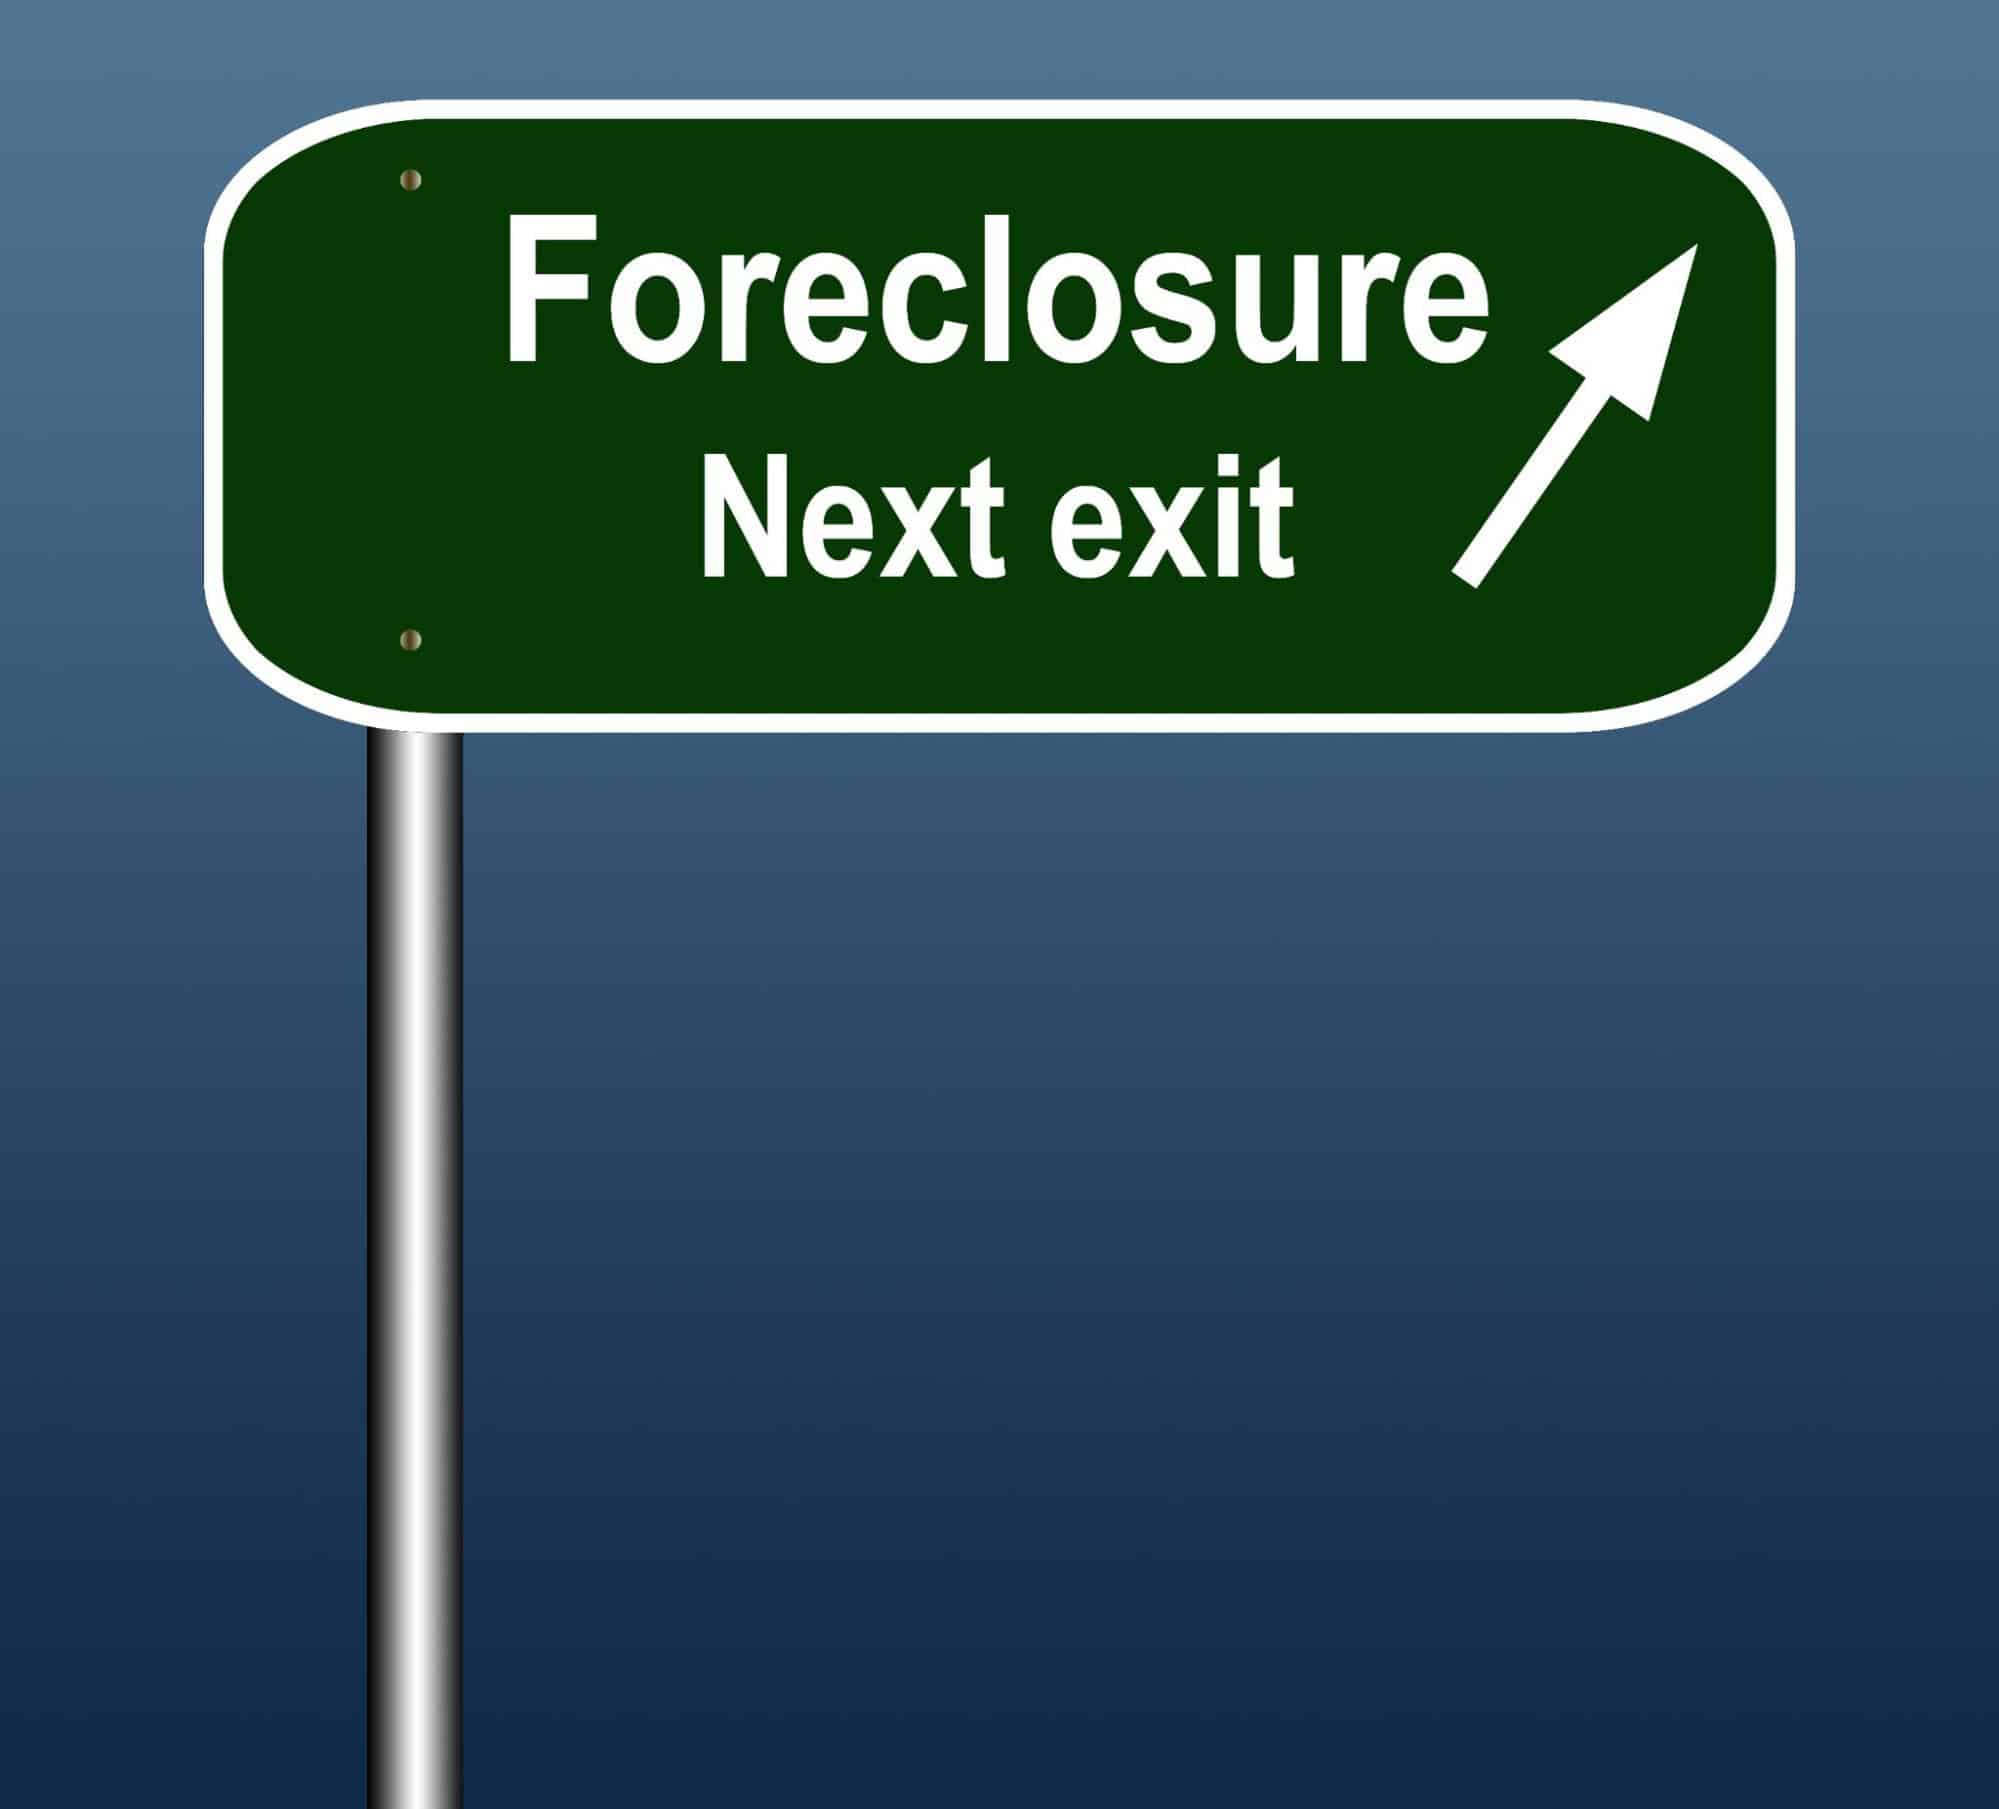 What Are the Most Common Causes of Foreclosure?